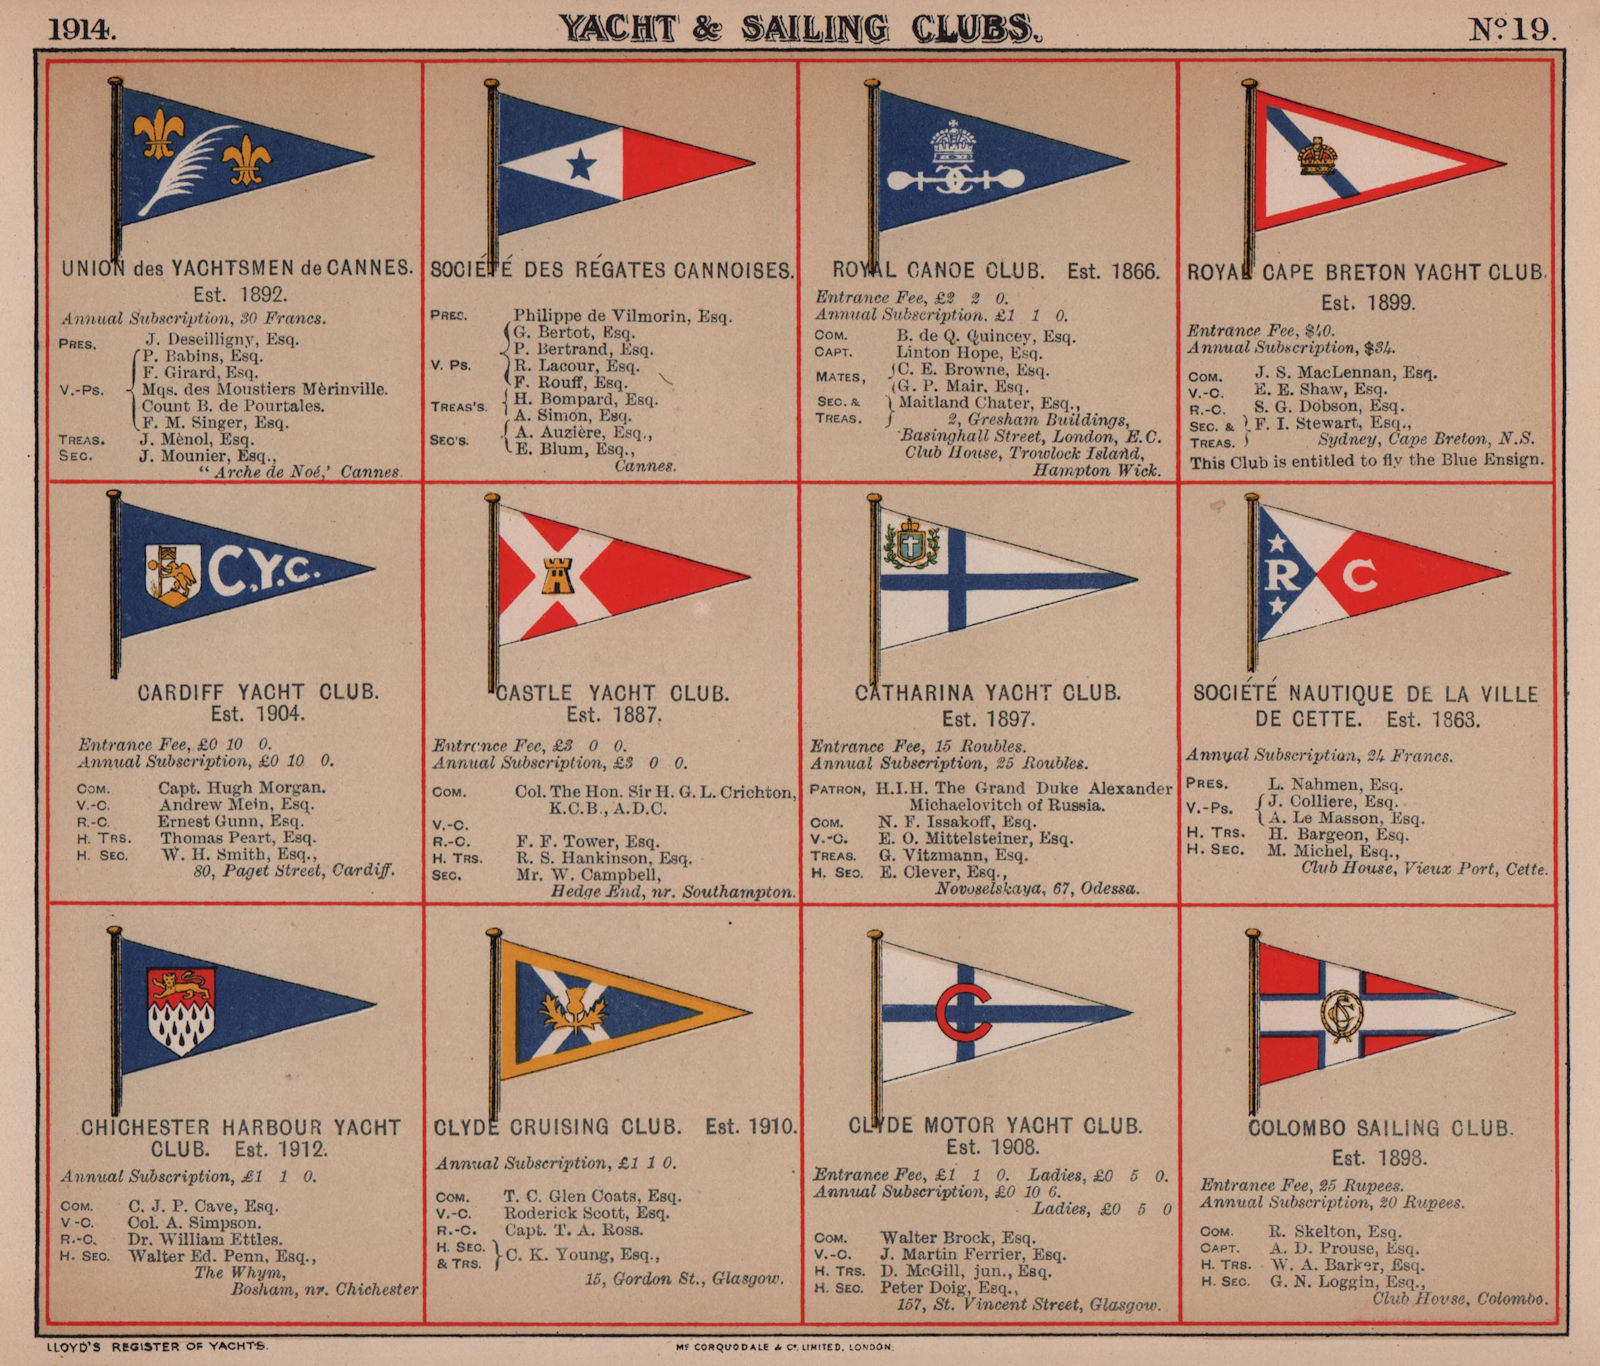 Associate Product YACHT & SAILING CLUB FLAGS C Cannes Cardiff Catharina Chichester Colombo 1914